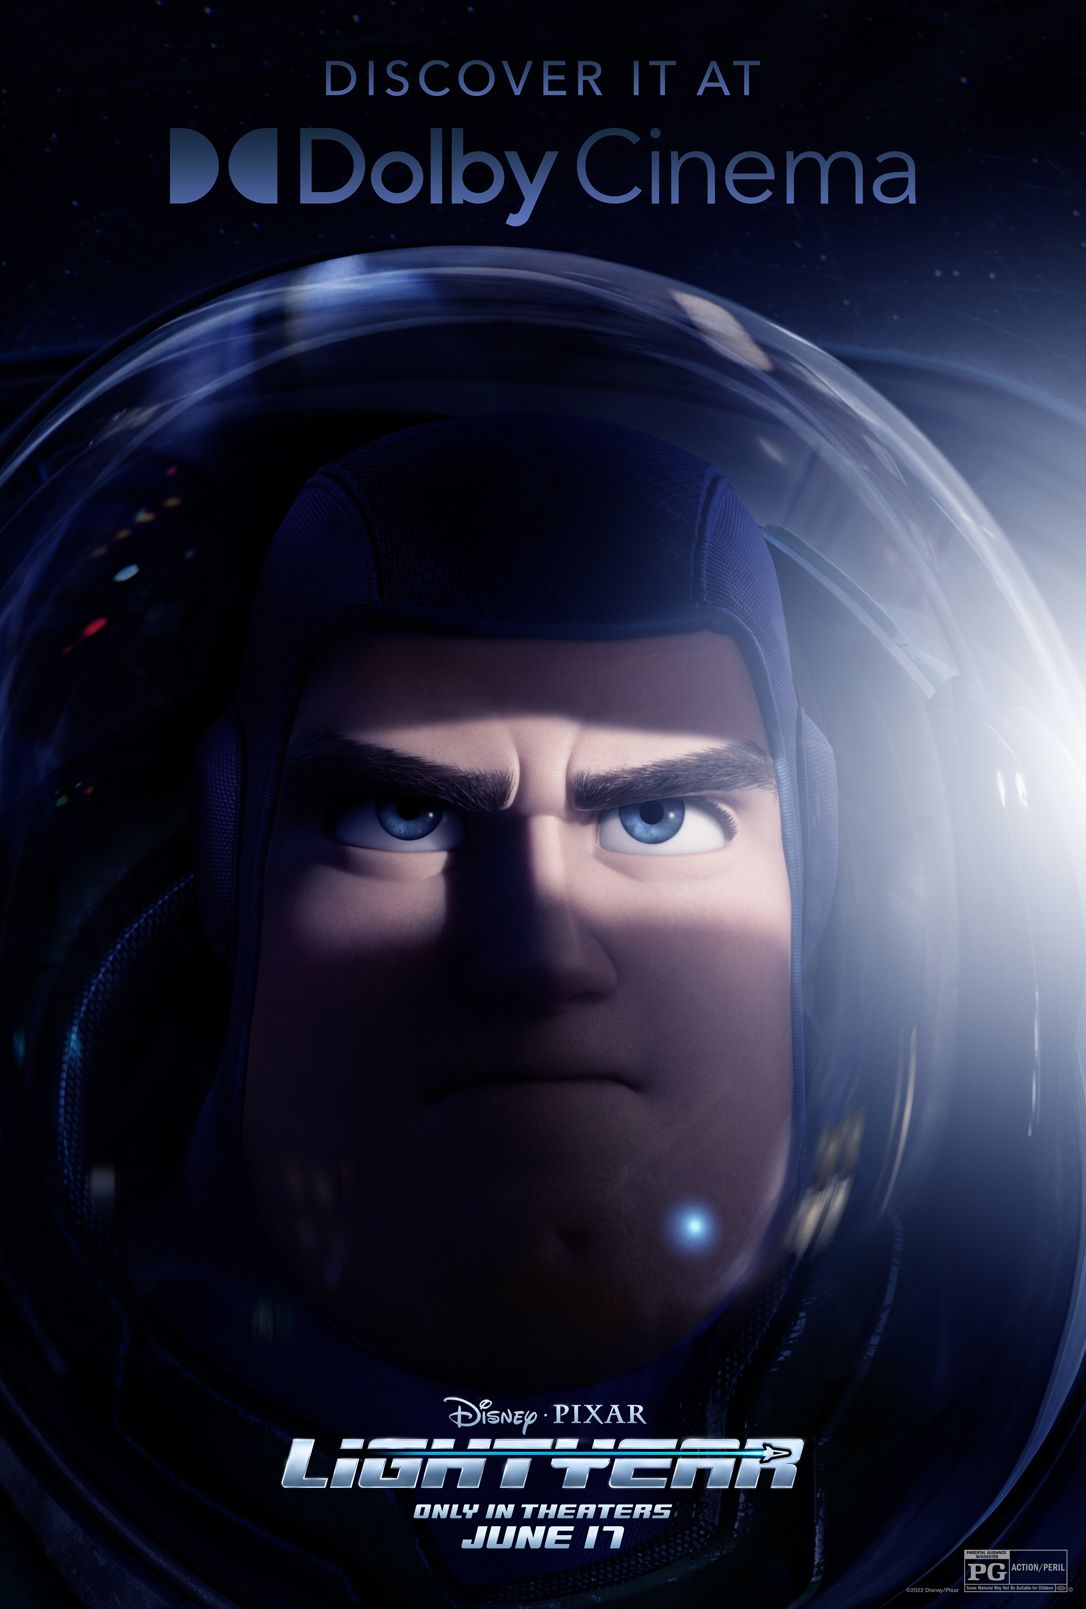 Chris Evans' Buzz Is Ready for Action in Lightyear's Dramatic New Poster